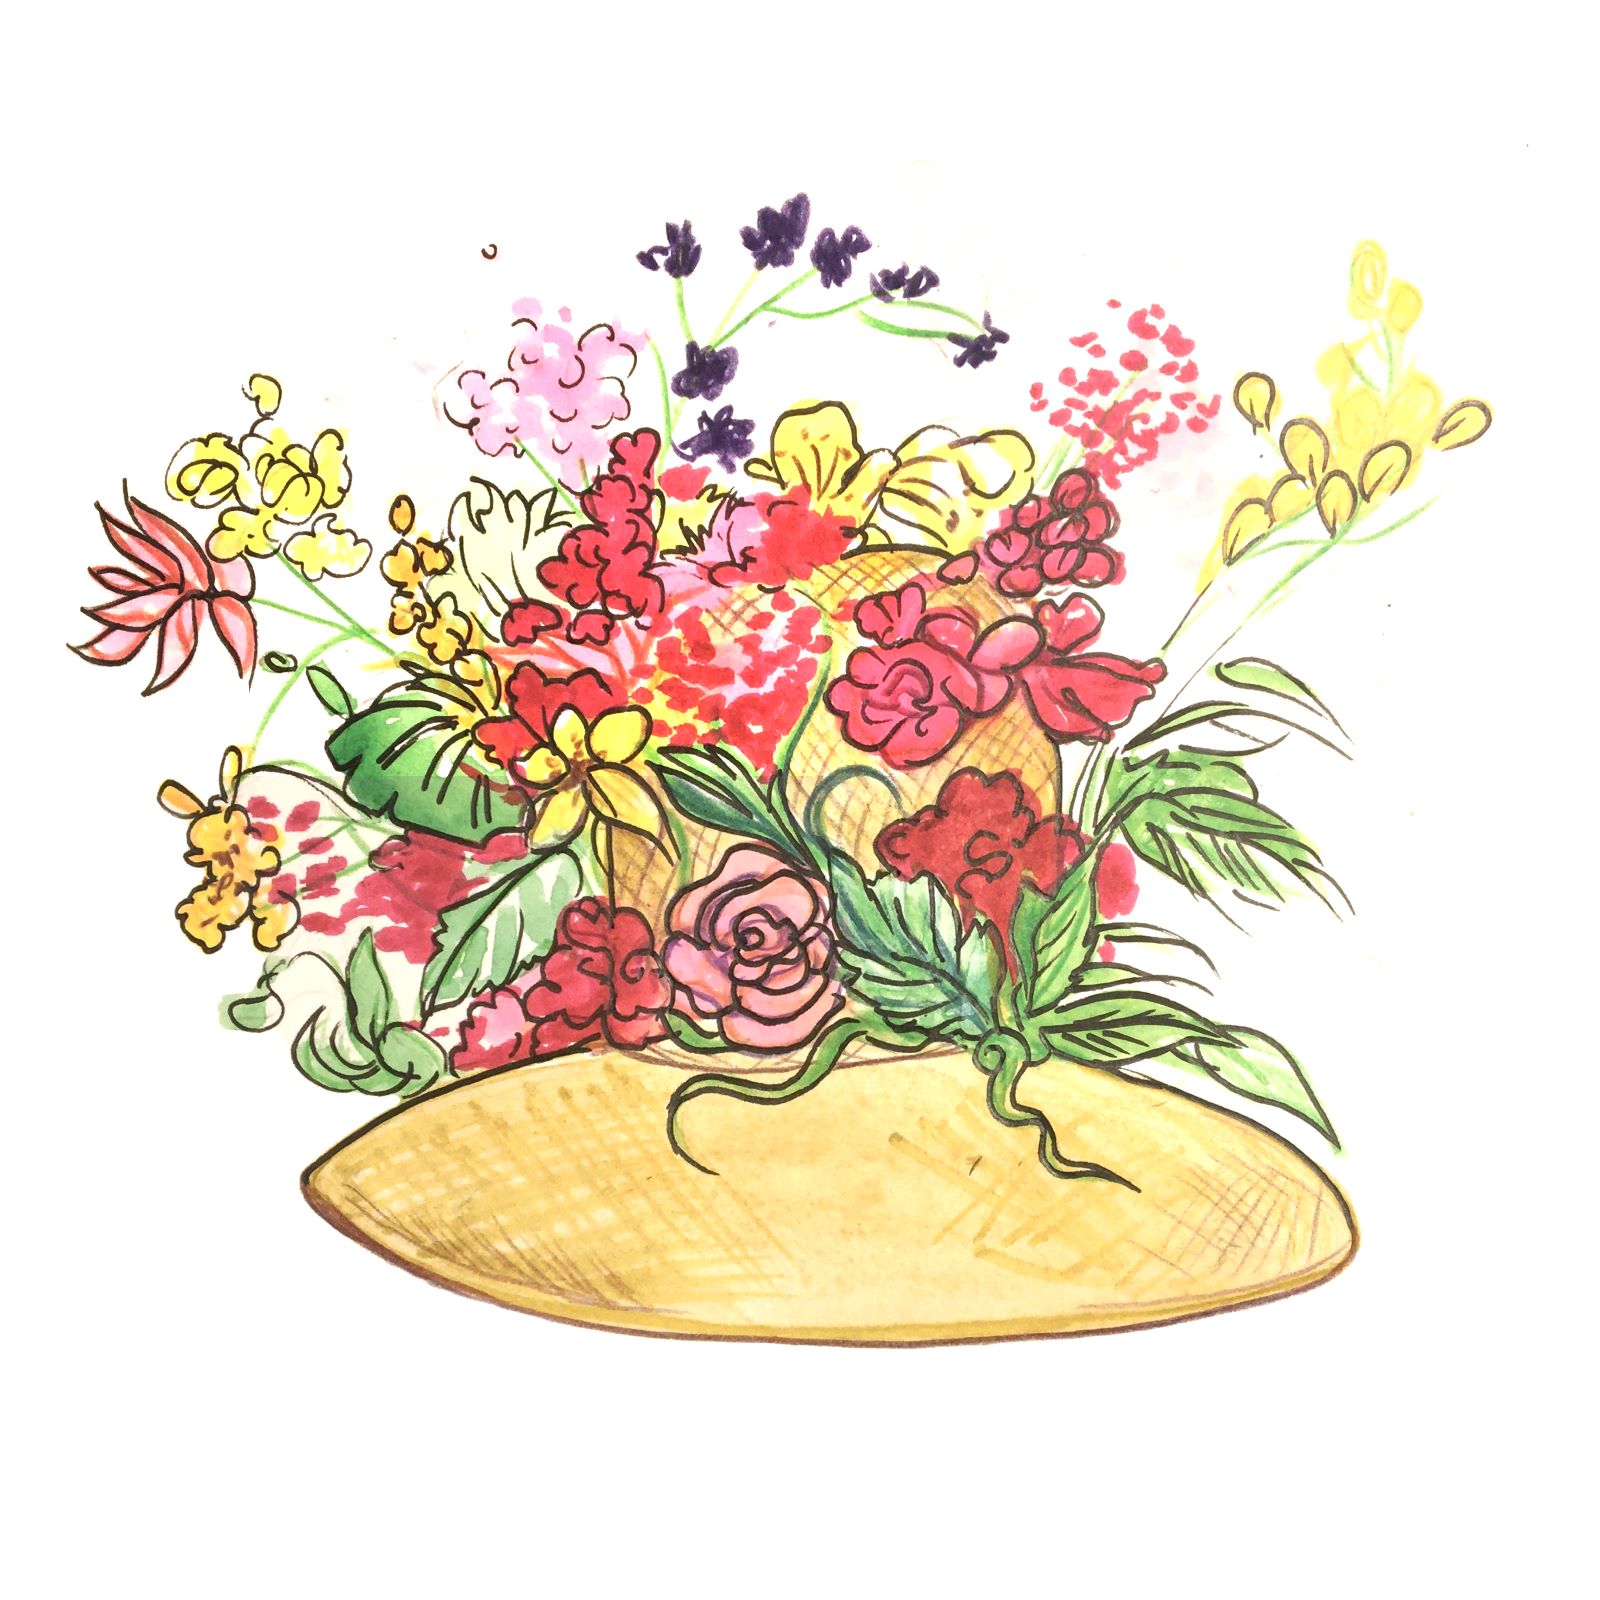 An illustration of a straw hat adorned with fresh colourful flowers.